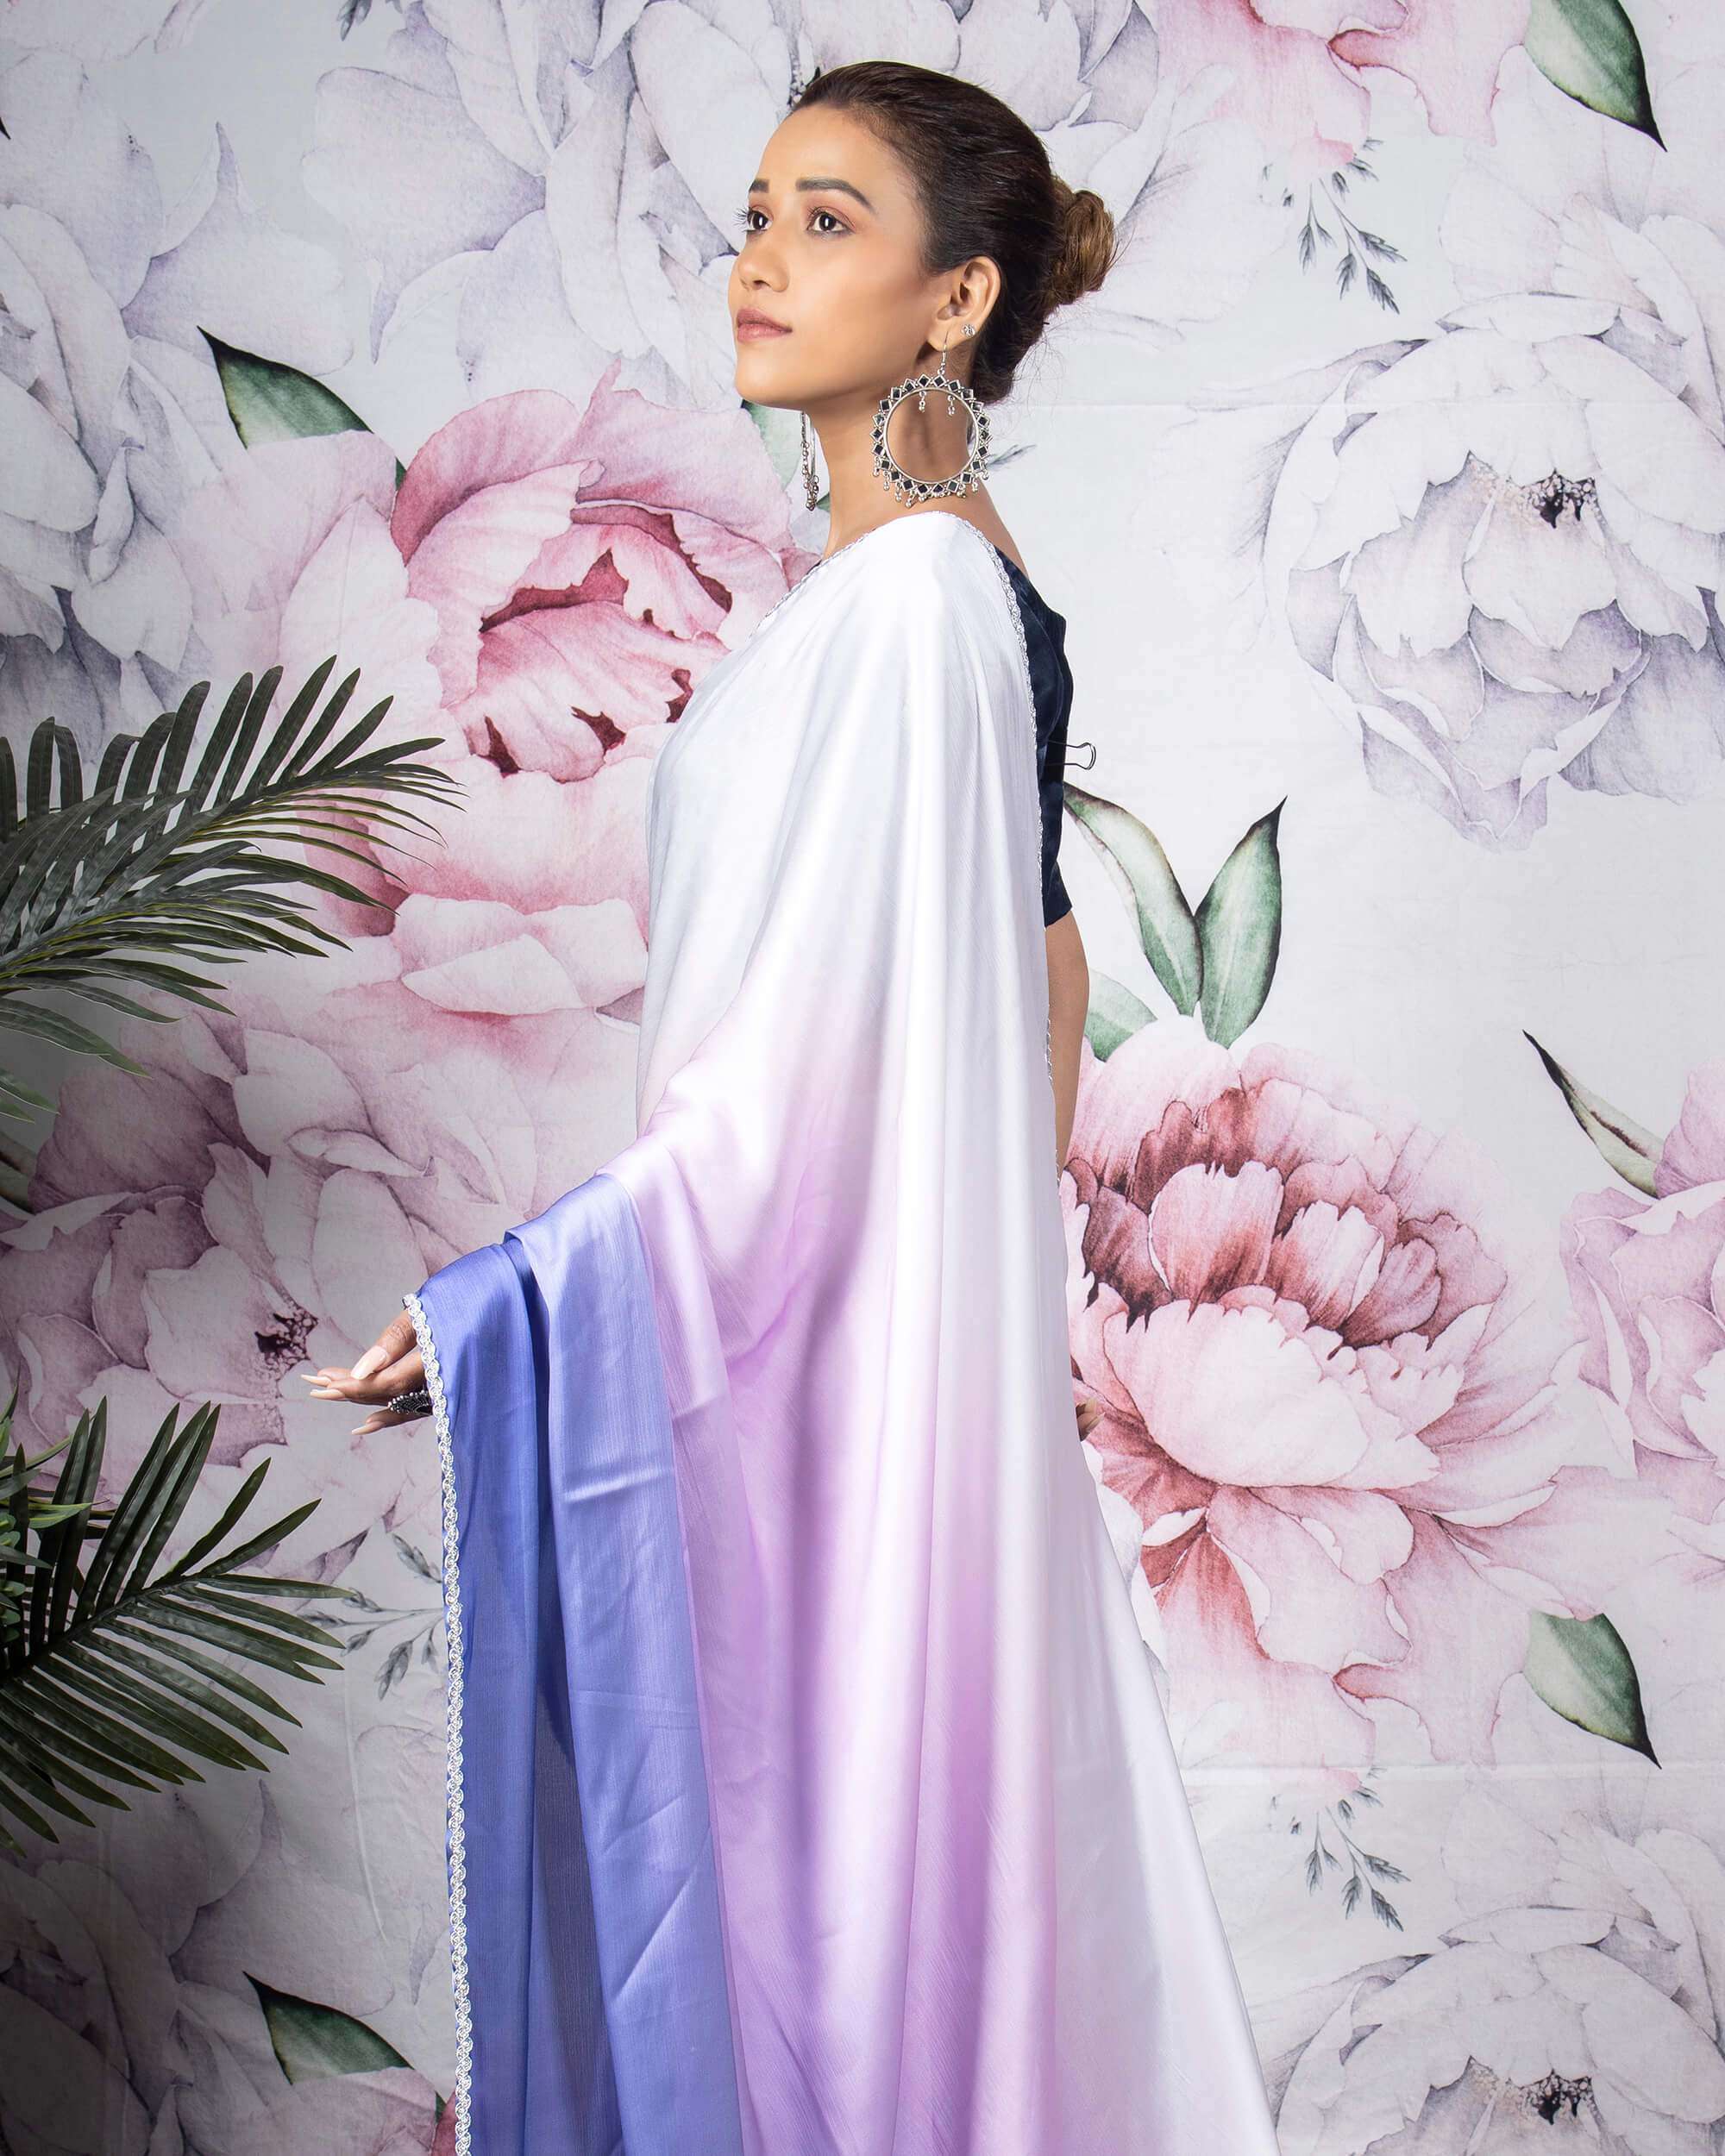 Buy white rasal jacquard Net Saree With Lace Border Unstiched Contrast Hevy  Banglory Silk Blouse Piece(PURPLE) at Amazon.in